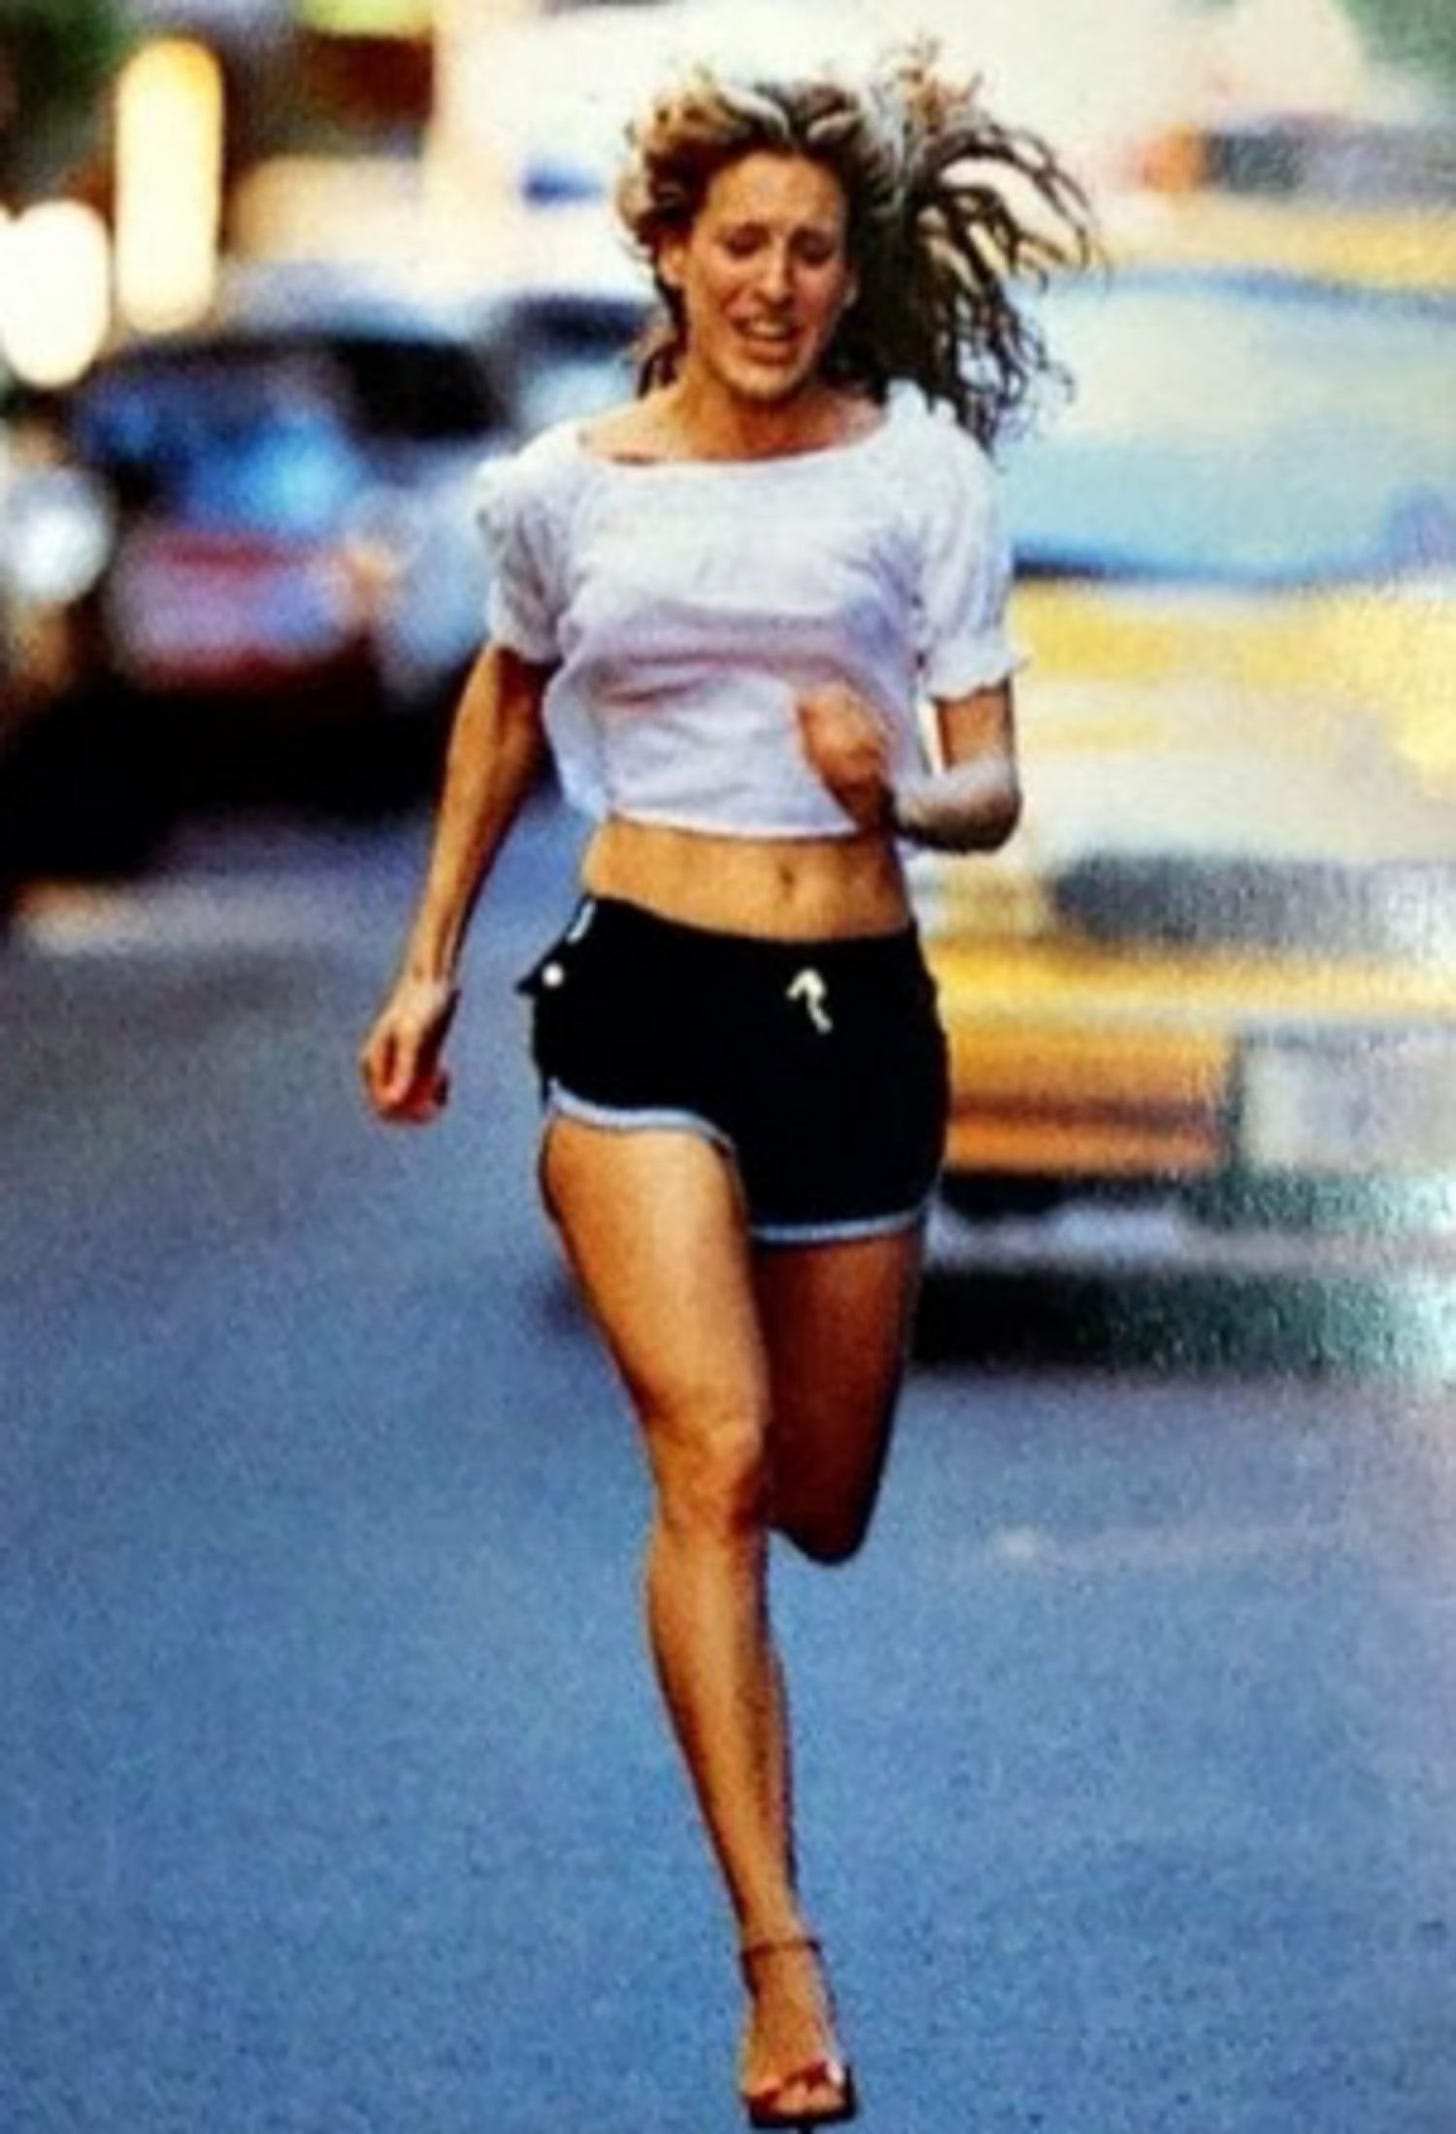 Pictures of Sarah Jessica Parker (and Carrie Bradshaw) Running in Heels |  Glamour